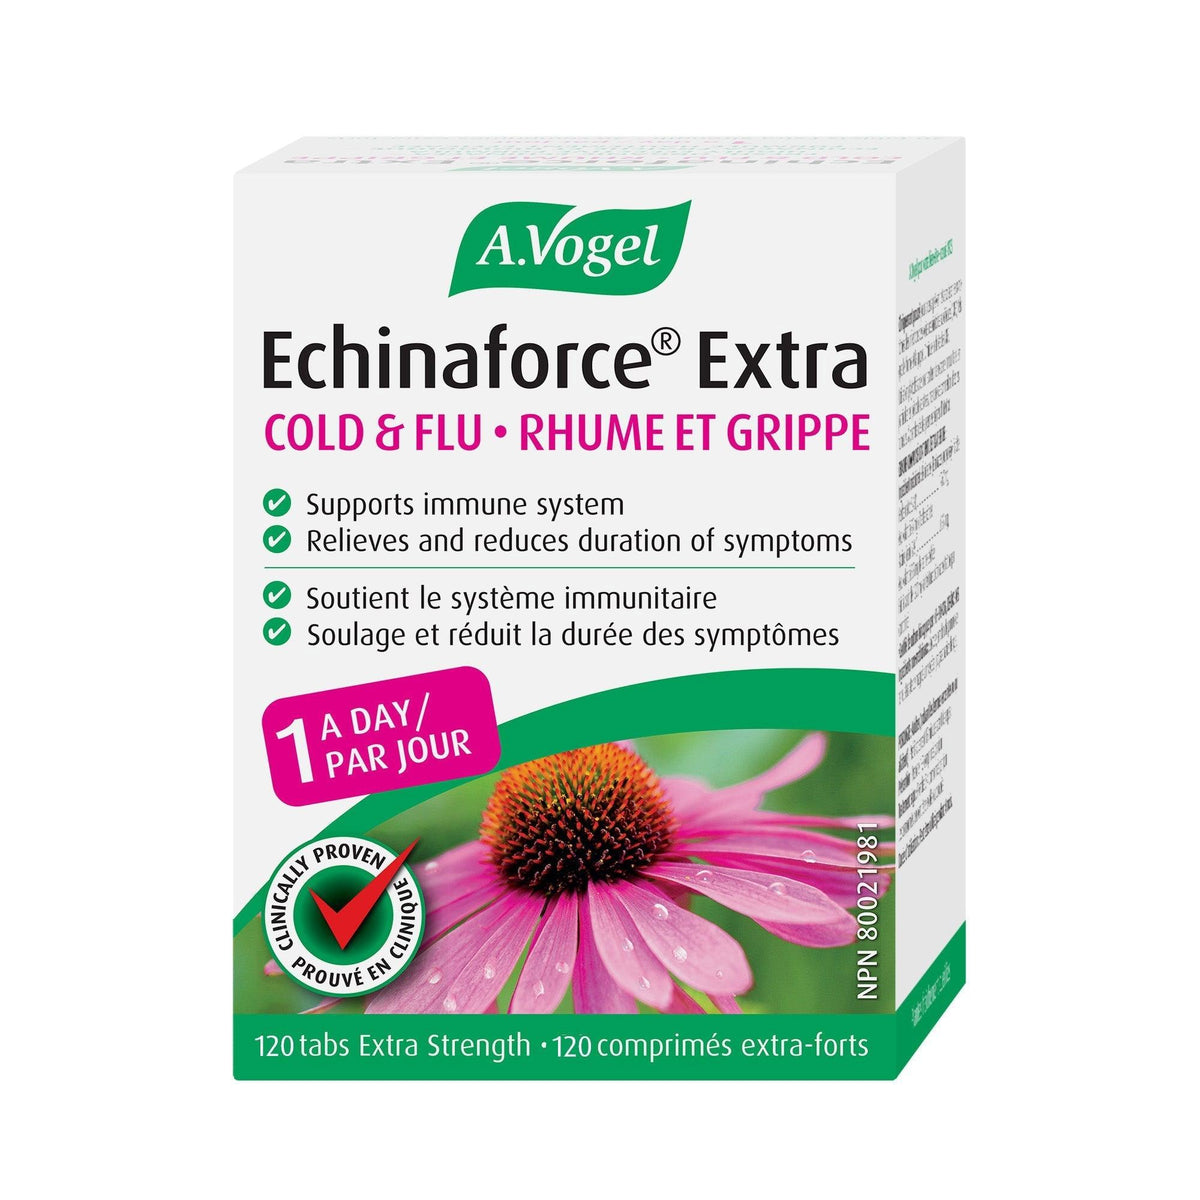 A.Vogel Echinaforce Extra Strength 120 Tabs Cough, Cold & Flu at Village Vitamin Store